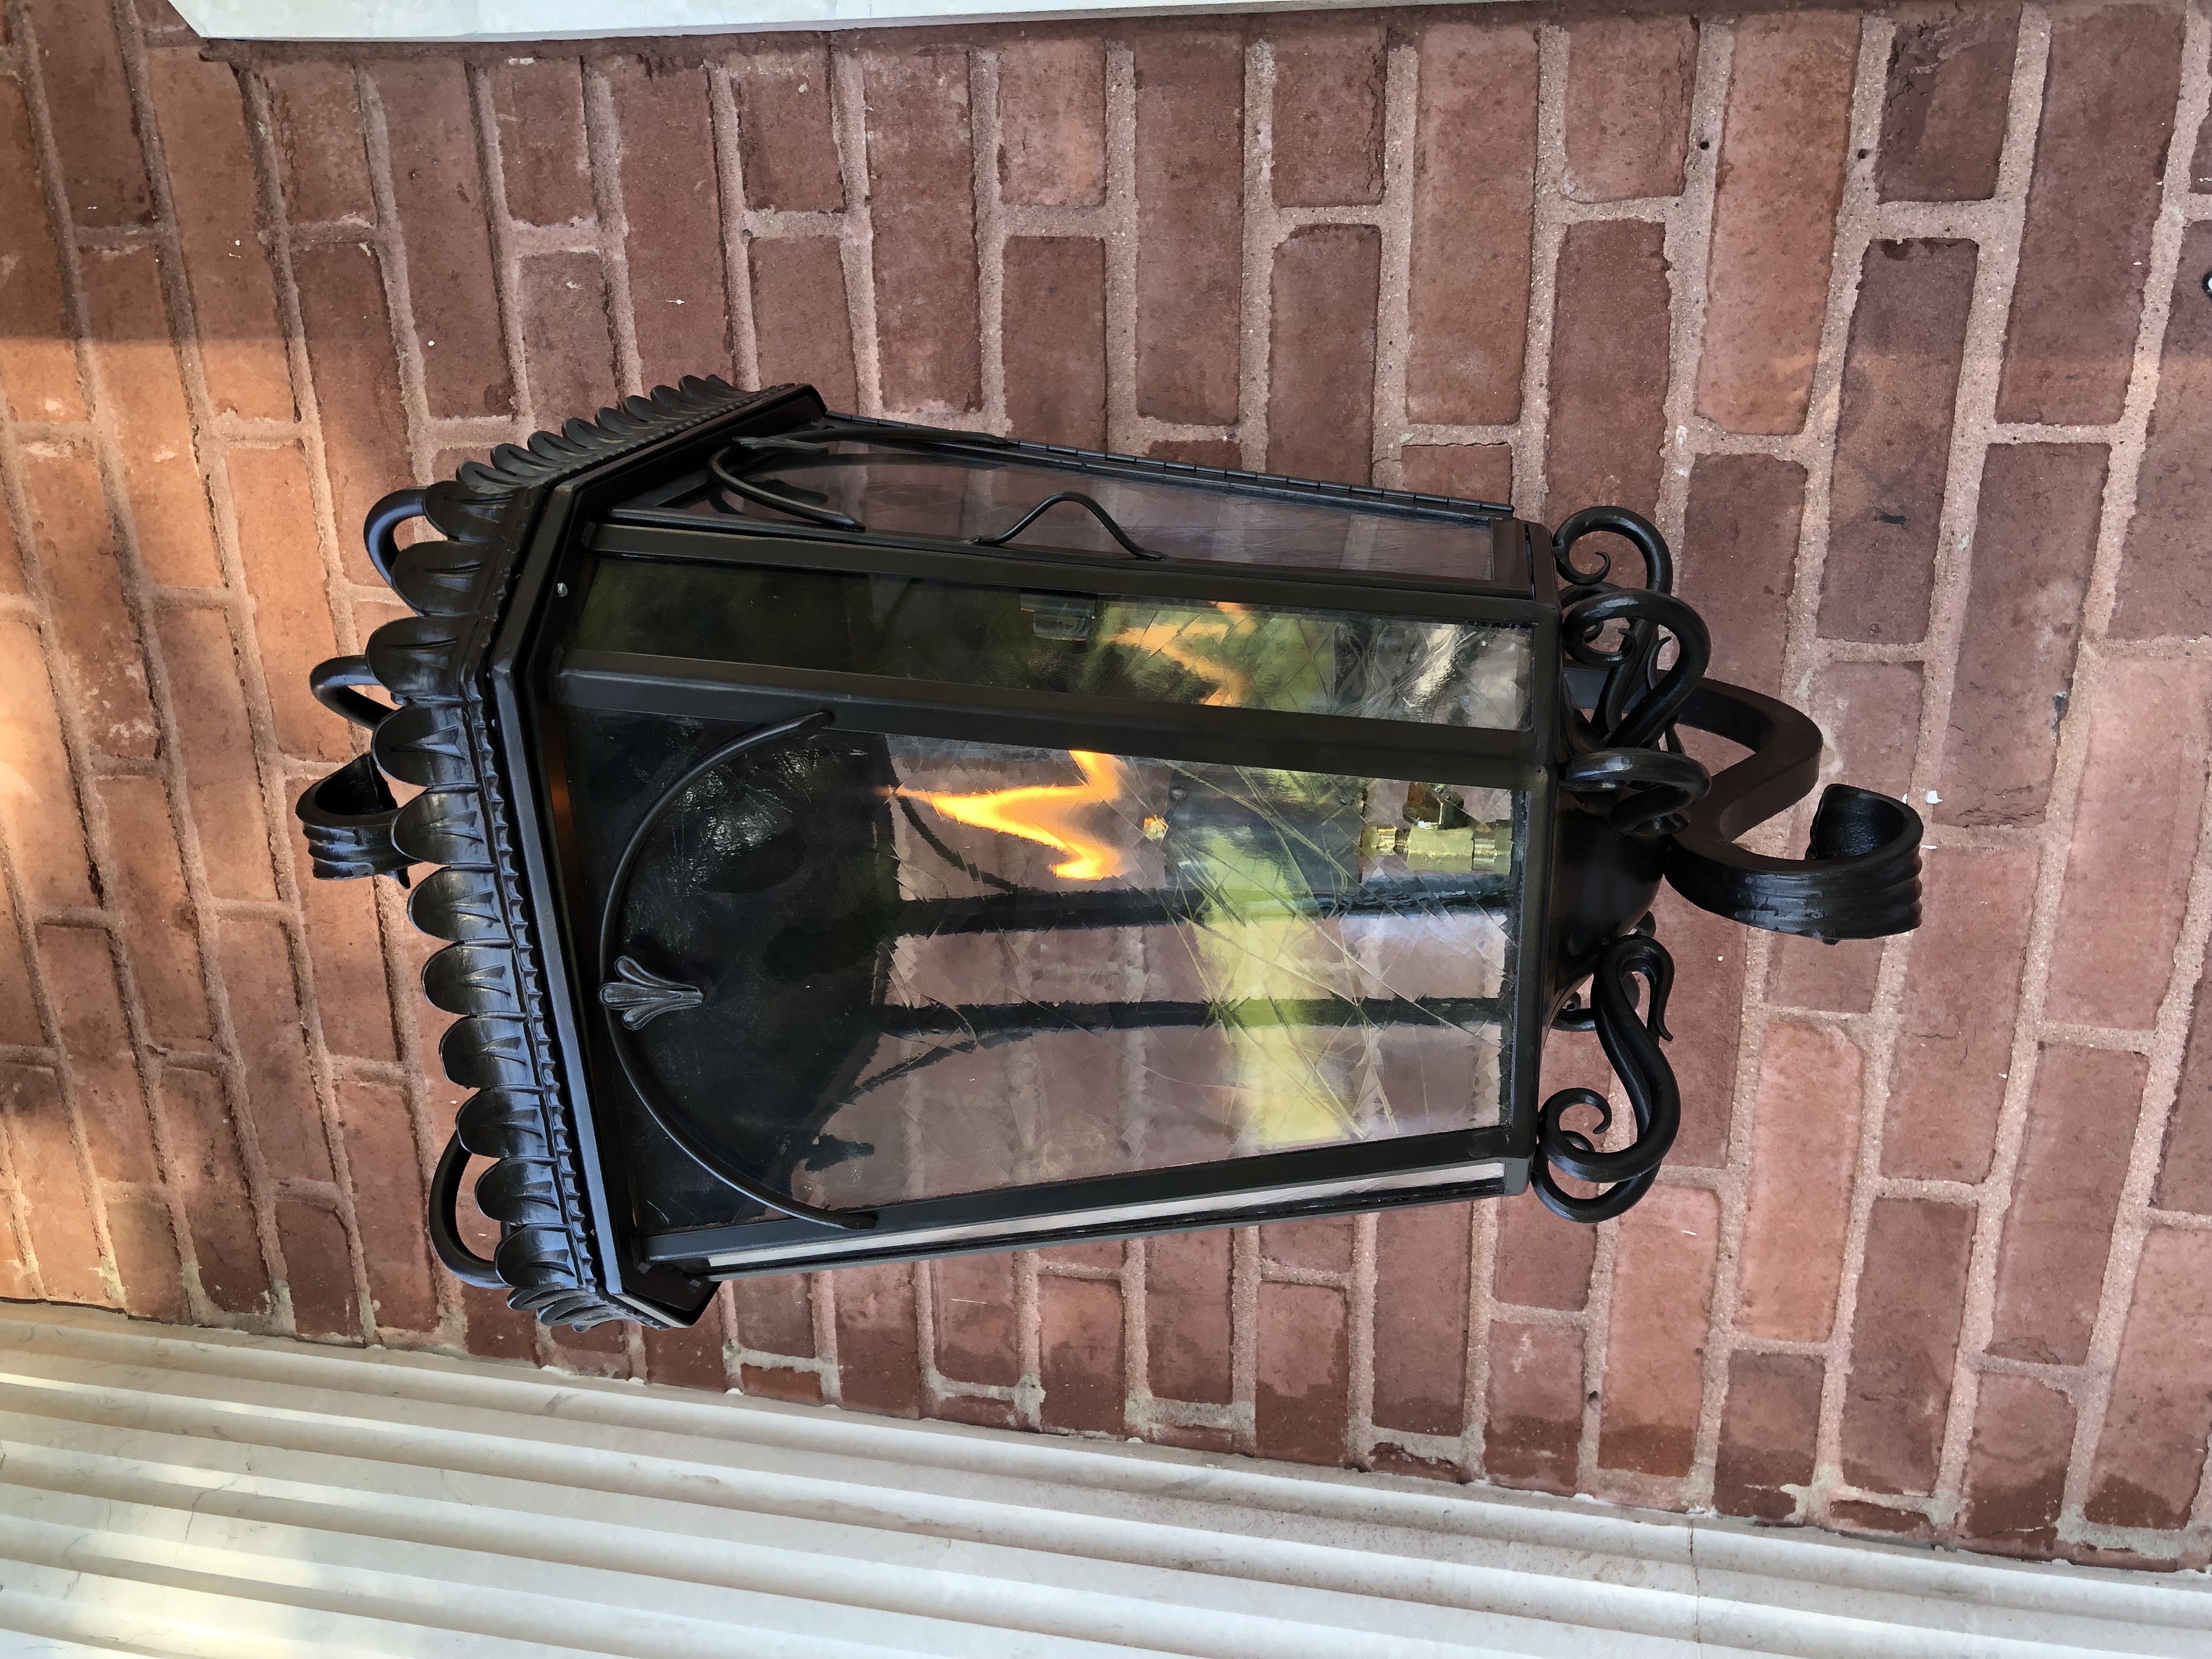 One of 2 Wall mounted gas lamp 32” tall